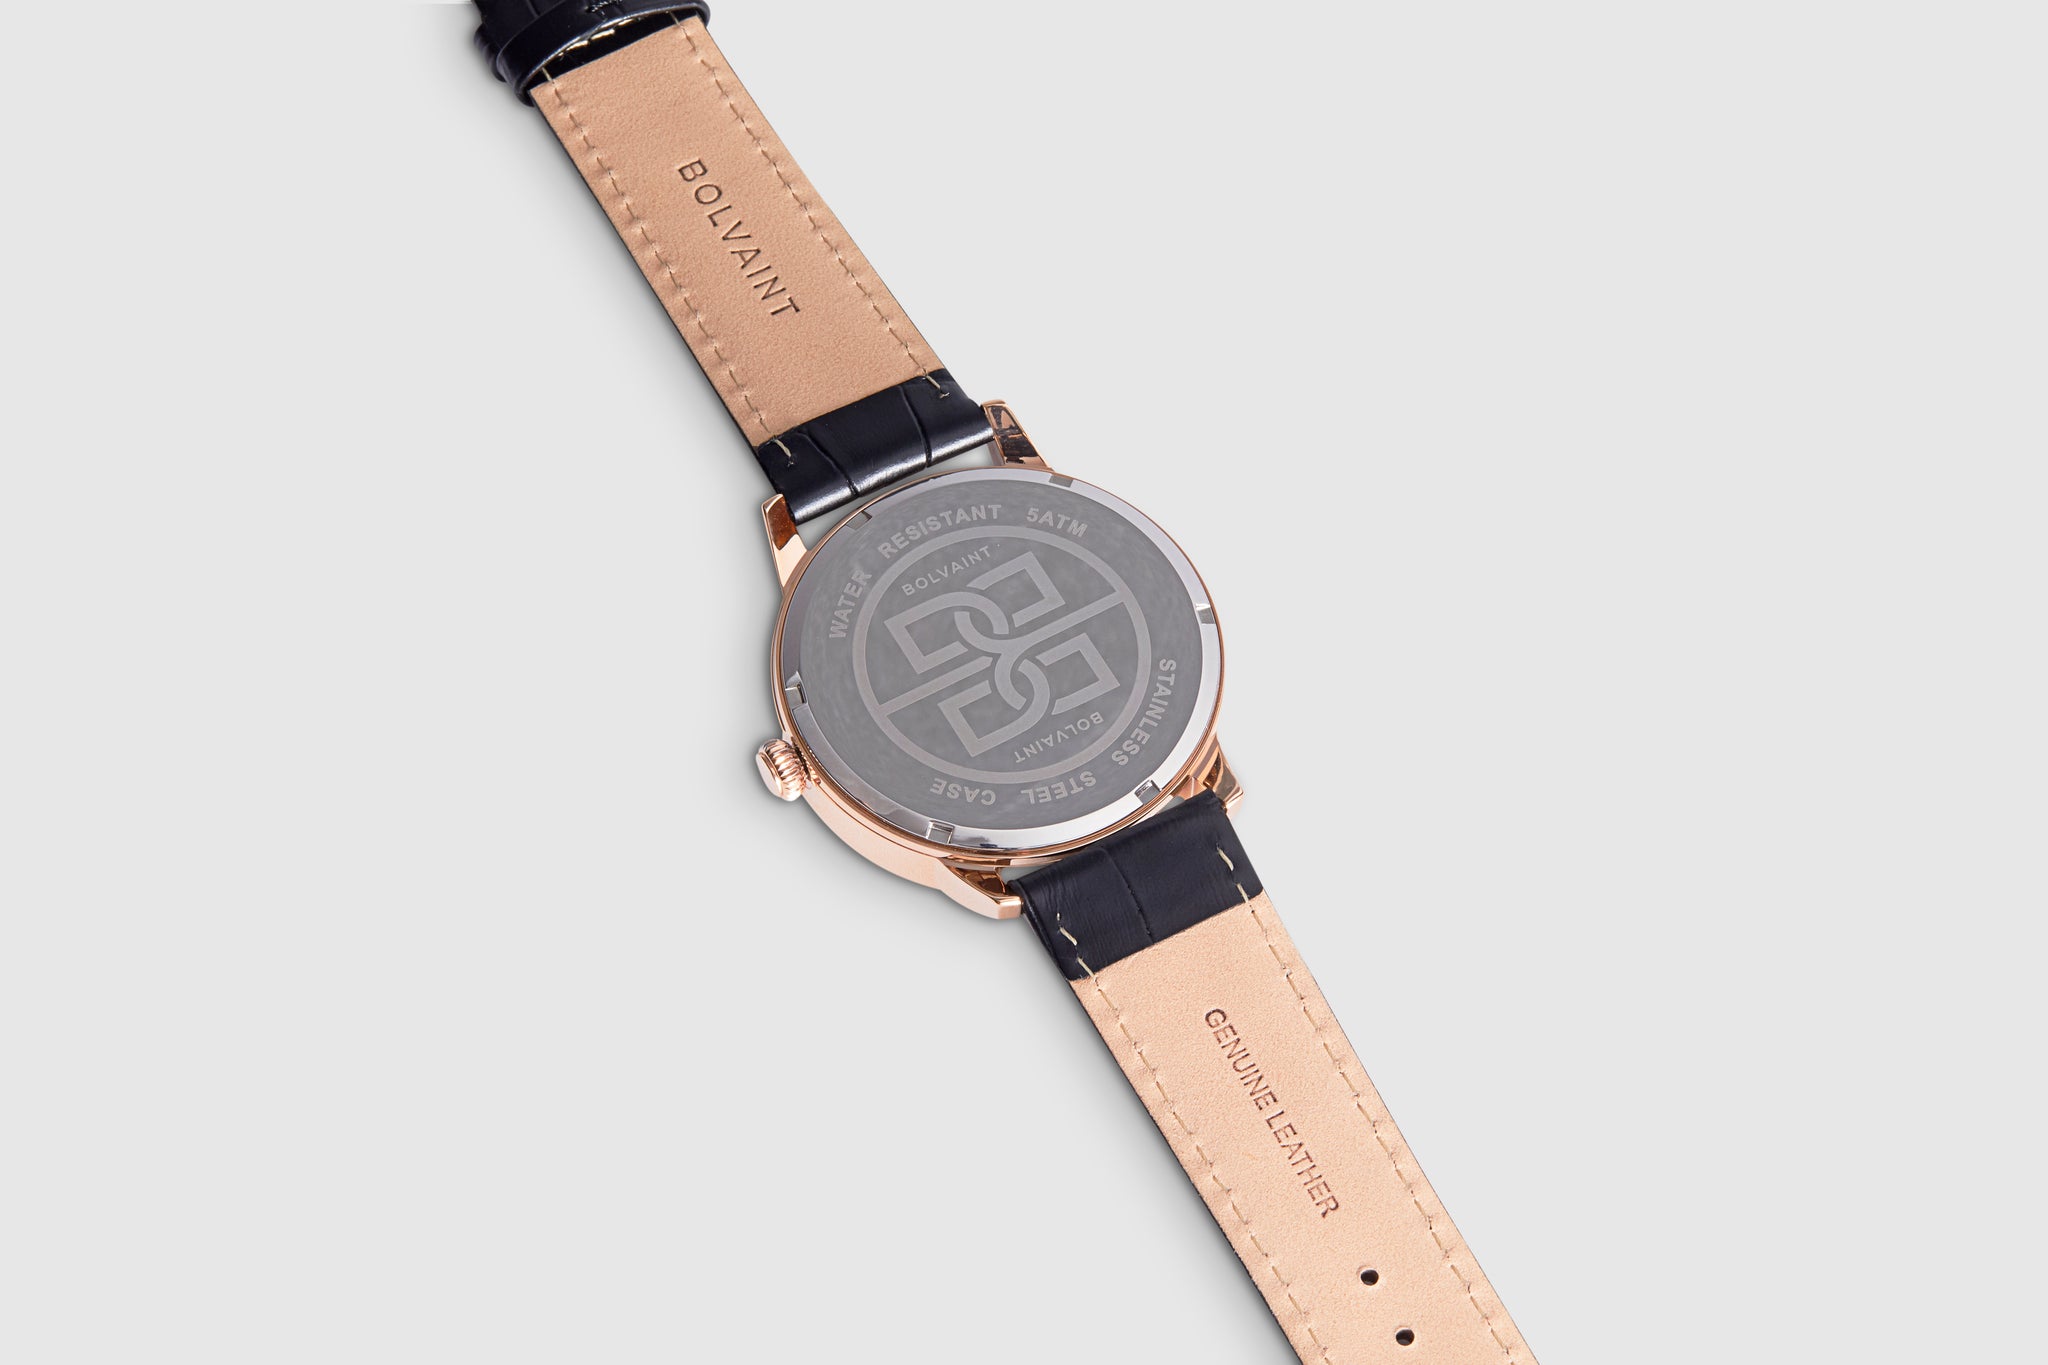 The Mallory Noir in Rose Gold